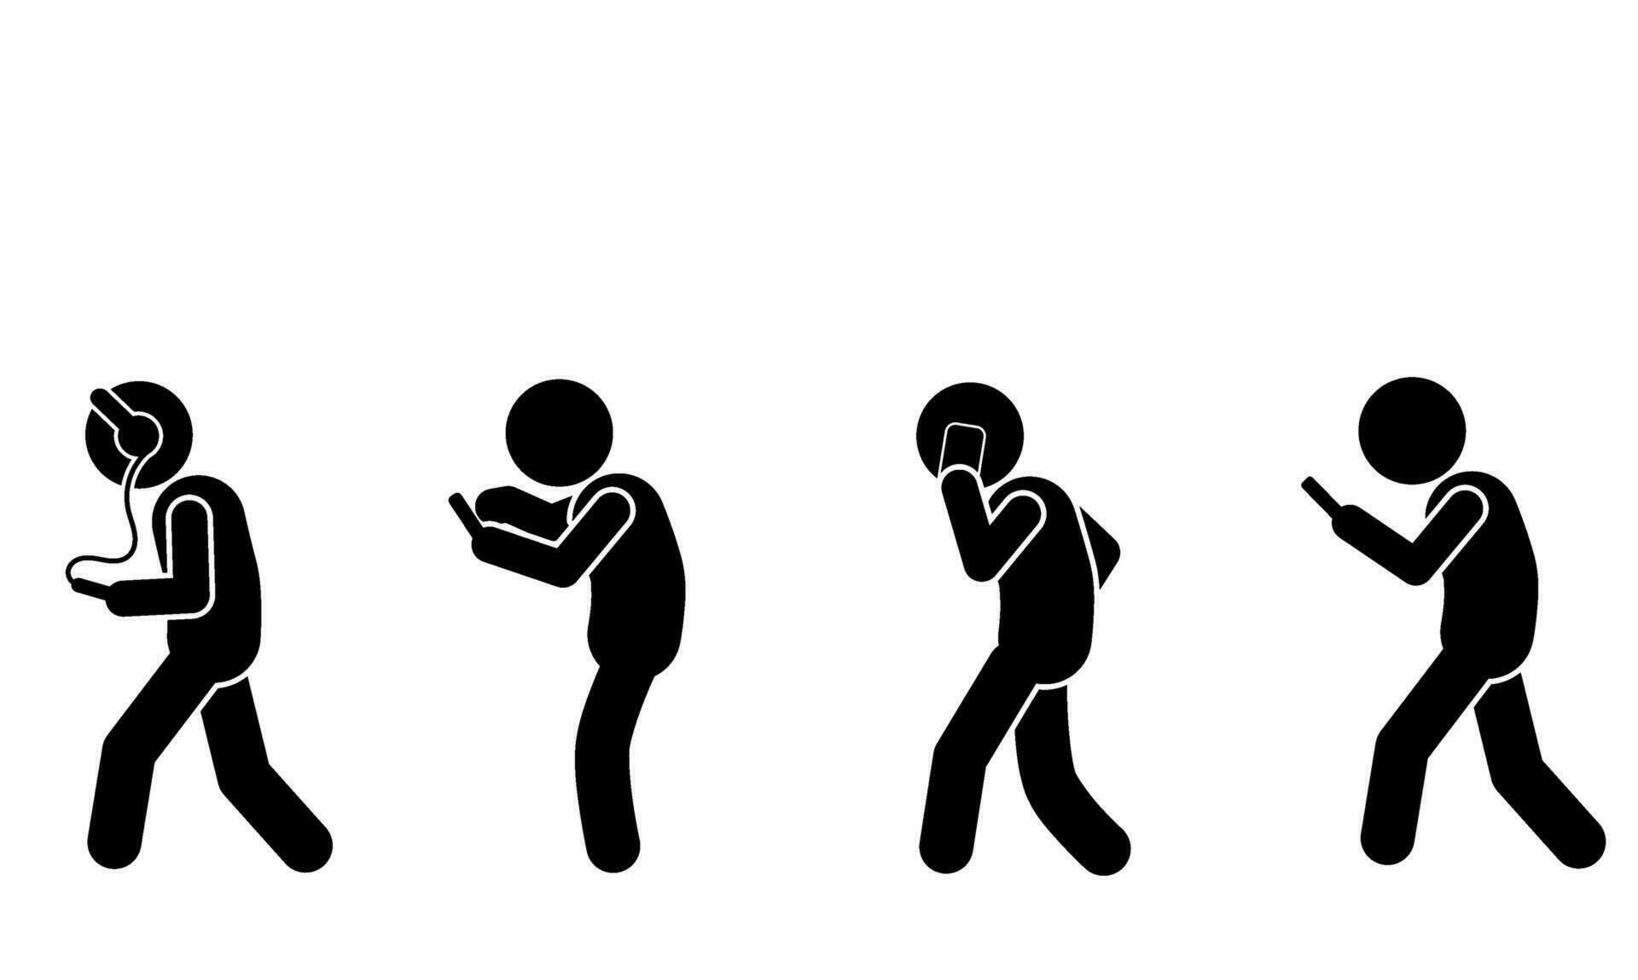 pictogram man using smartphone icon over white background, silhouette style, vector illustration